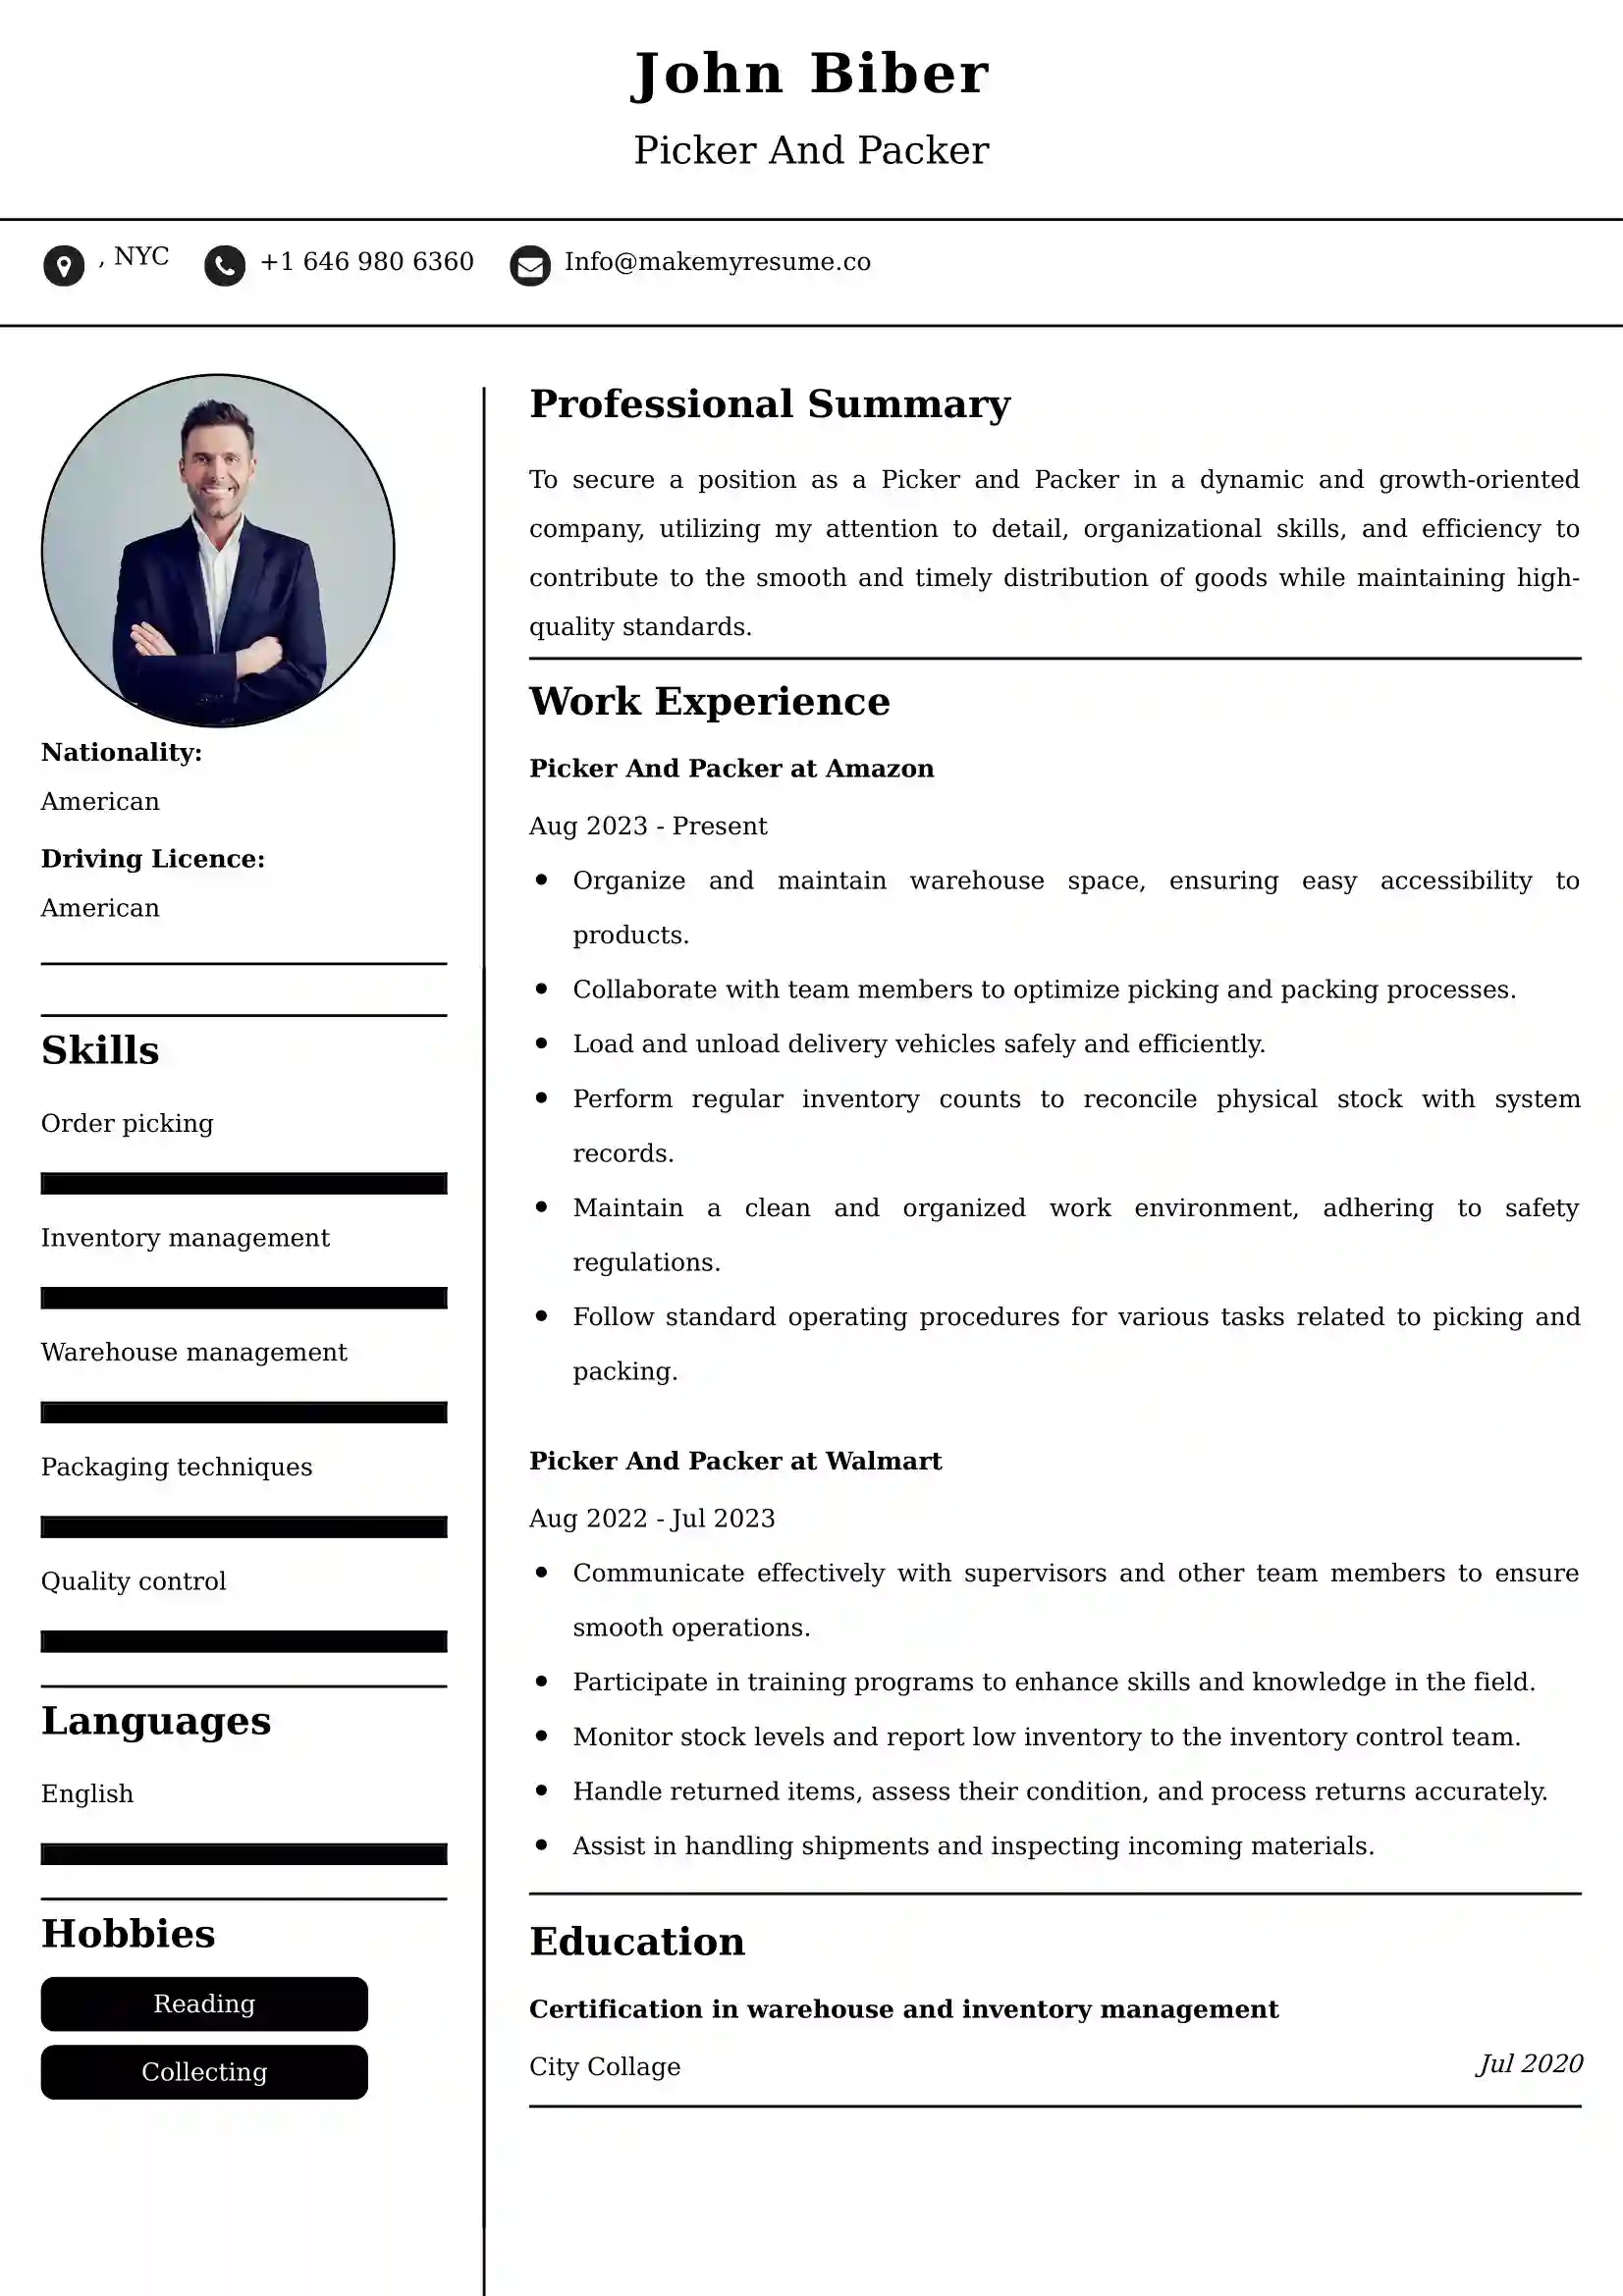 Picker And Packer Resume Examples - UK Format, Latest Template.